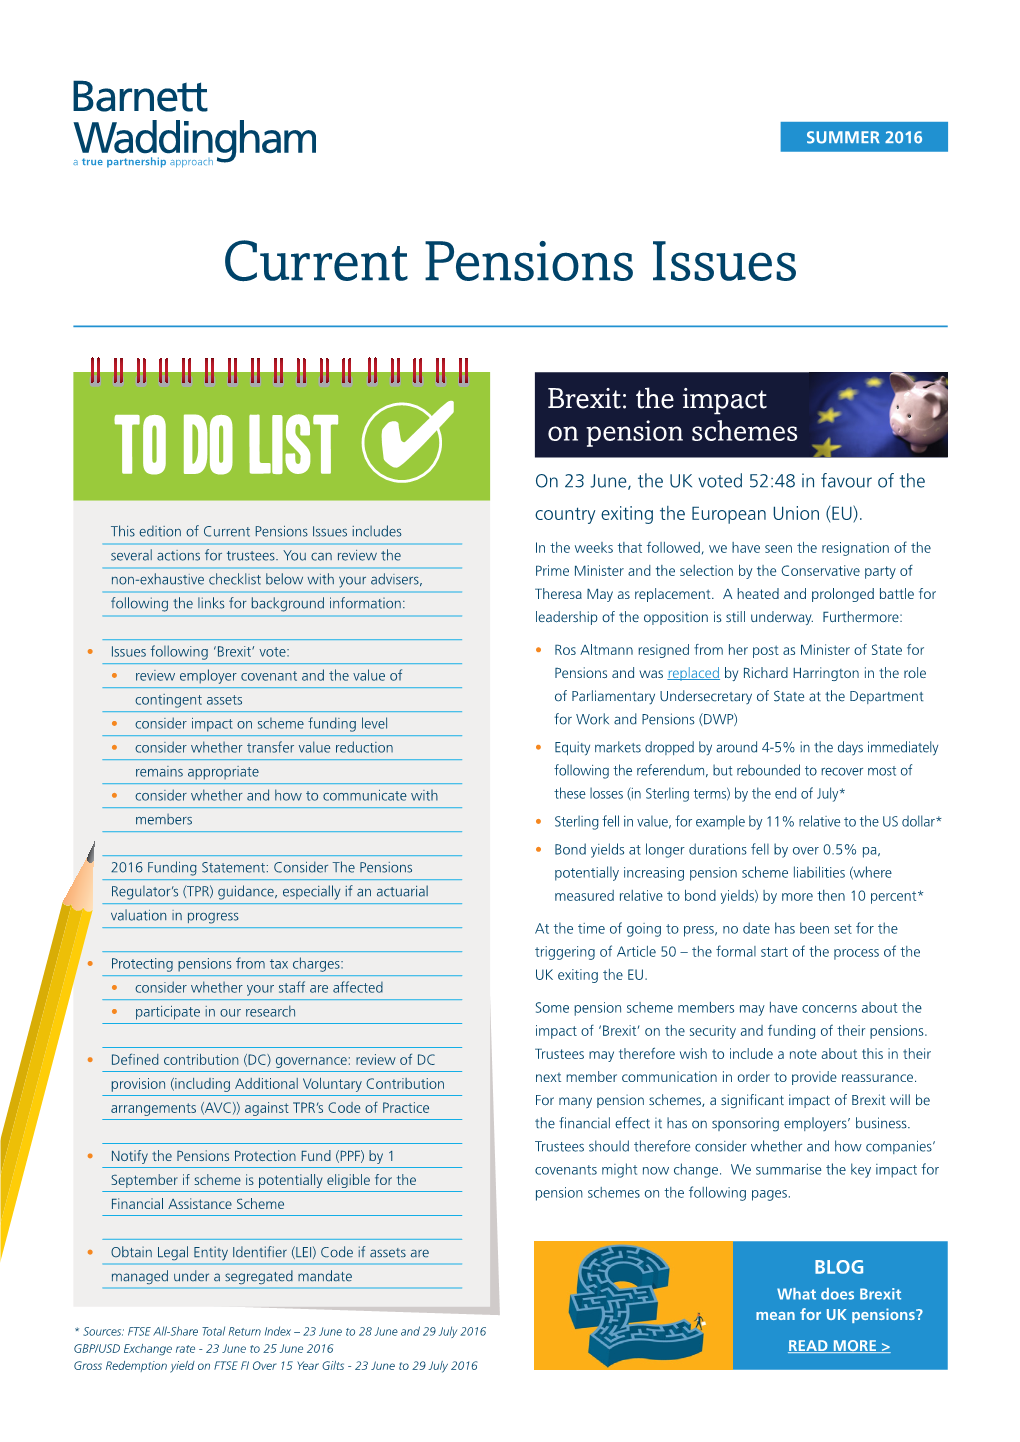 TO DO LIST 4 on Pension Schemes on 23 June, the UK Voted 52:48 in Favour of the Country Exiting the European Union (EU)